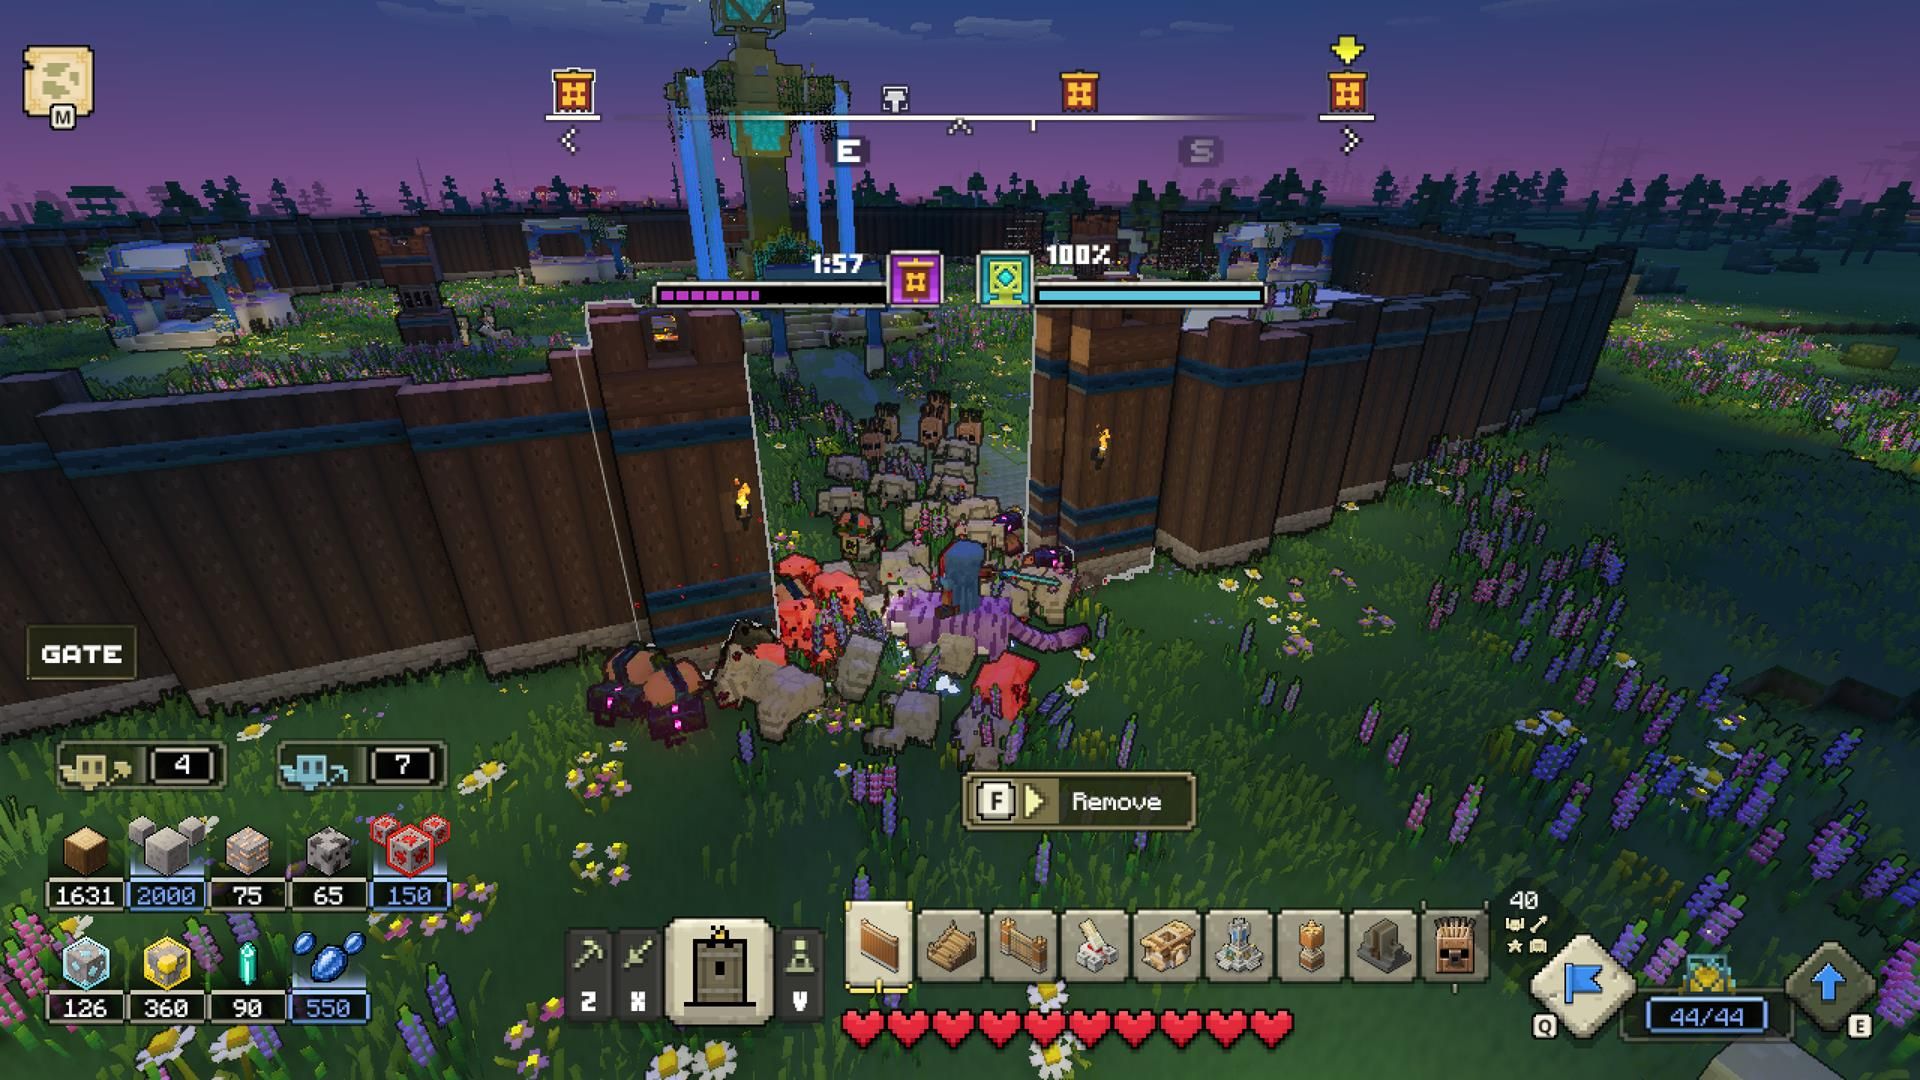 Minecraft Legends review - a messy spinoff that misses the point